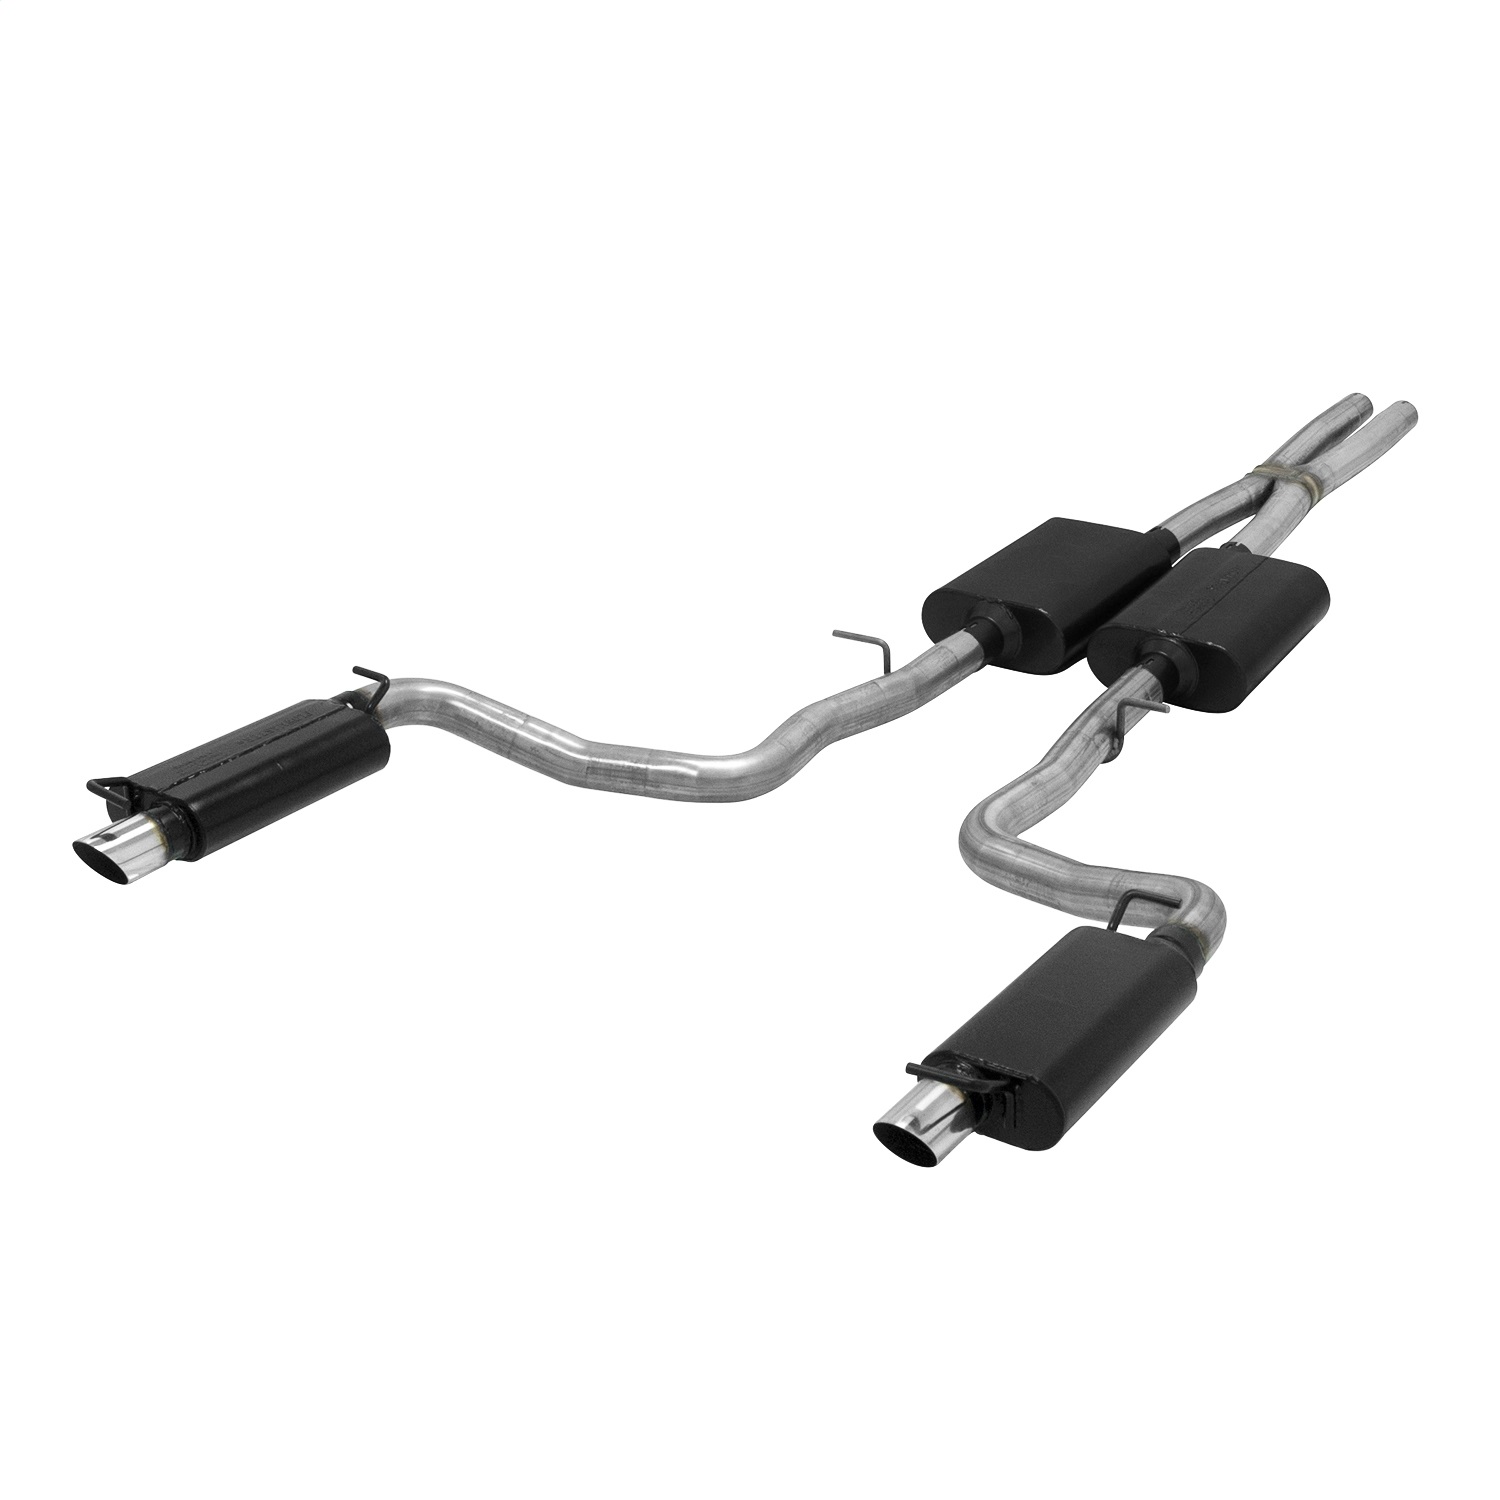 Flowmaster Flowmaster 817737 American Thunder Cat Back Exhaust System Fits 15 Challenger